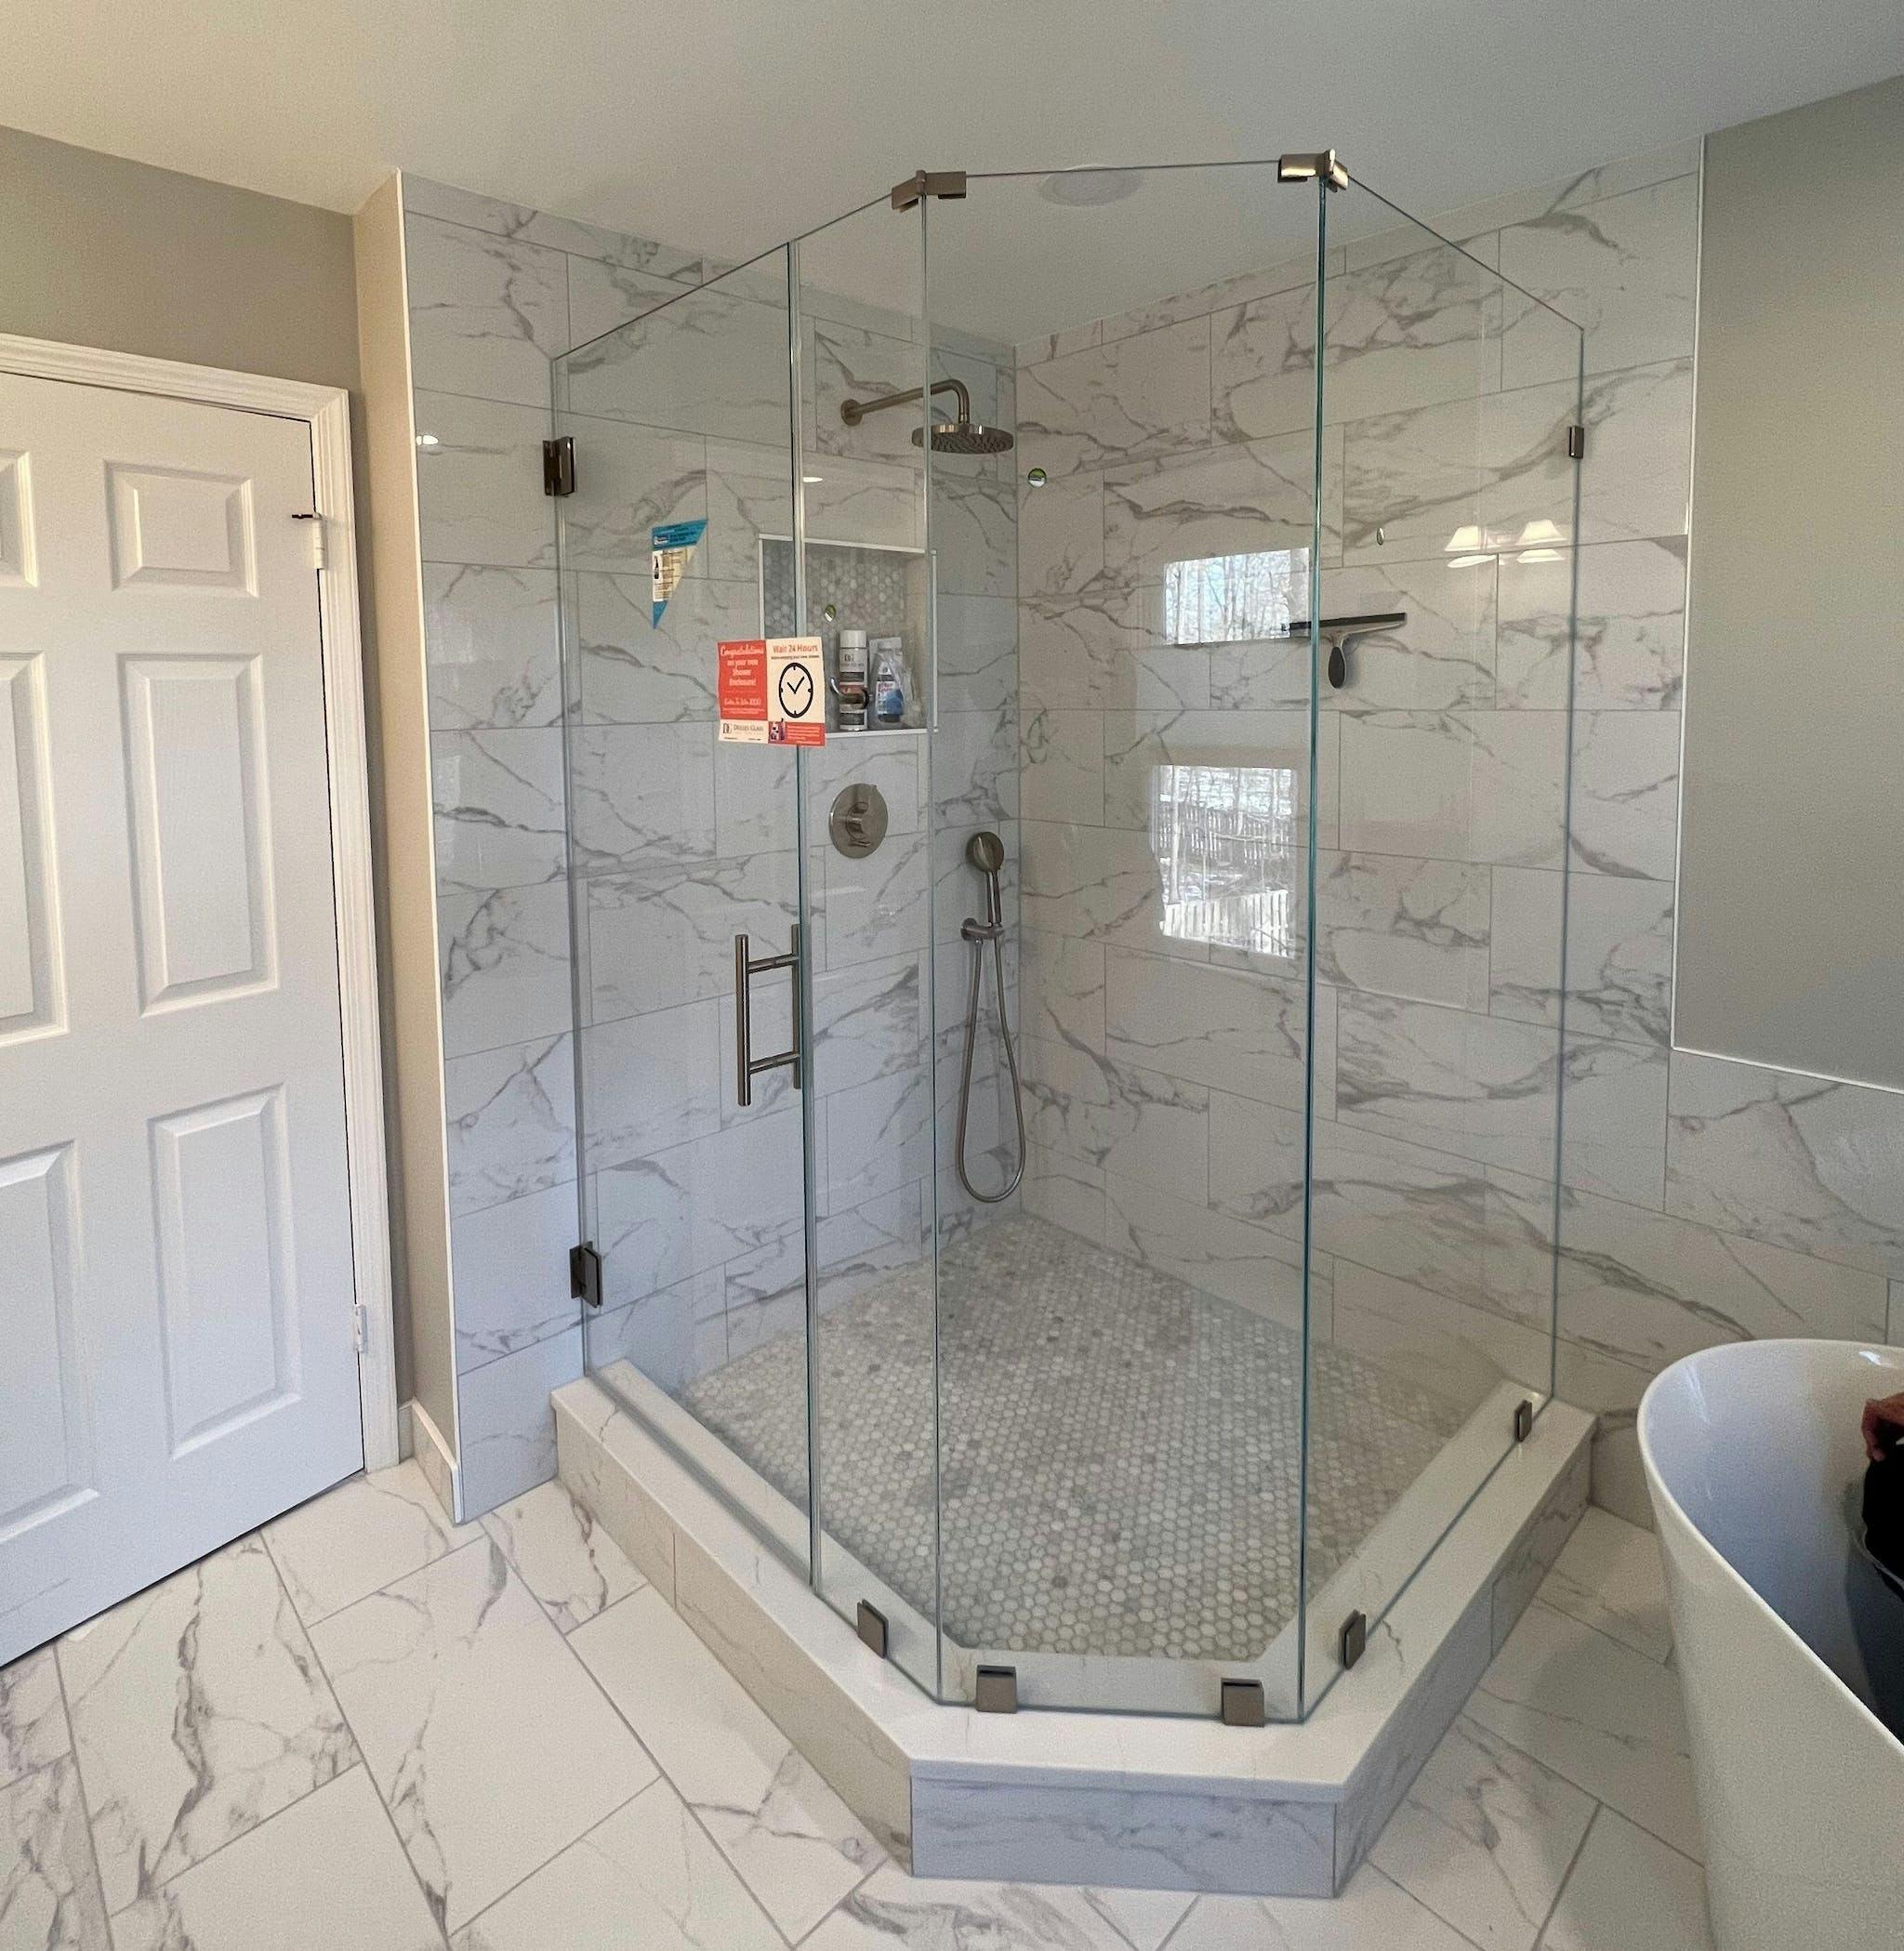 Large corner shower door enclosure with three sides, adjacent to a white door. The shower space and bathroom floor feature marble surfaces